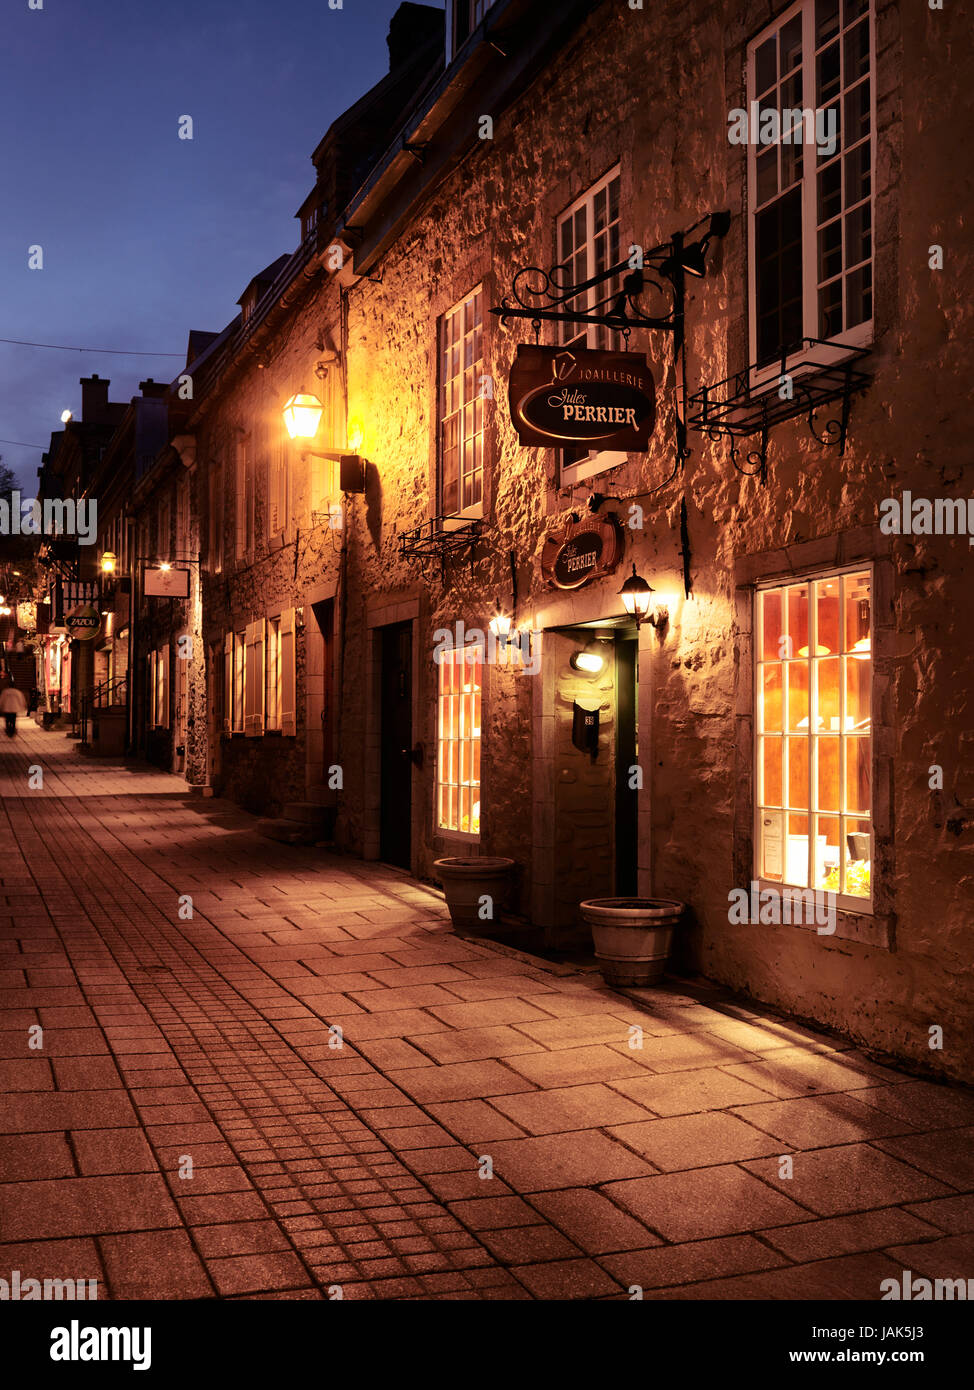 License and prints at MaximImages.com - shops lit with street light at night in Old Quebec City Petit Champlain historic street, Quebec, Canada. Stock Photo